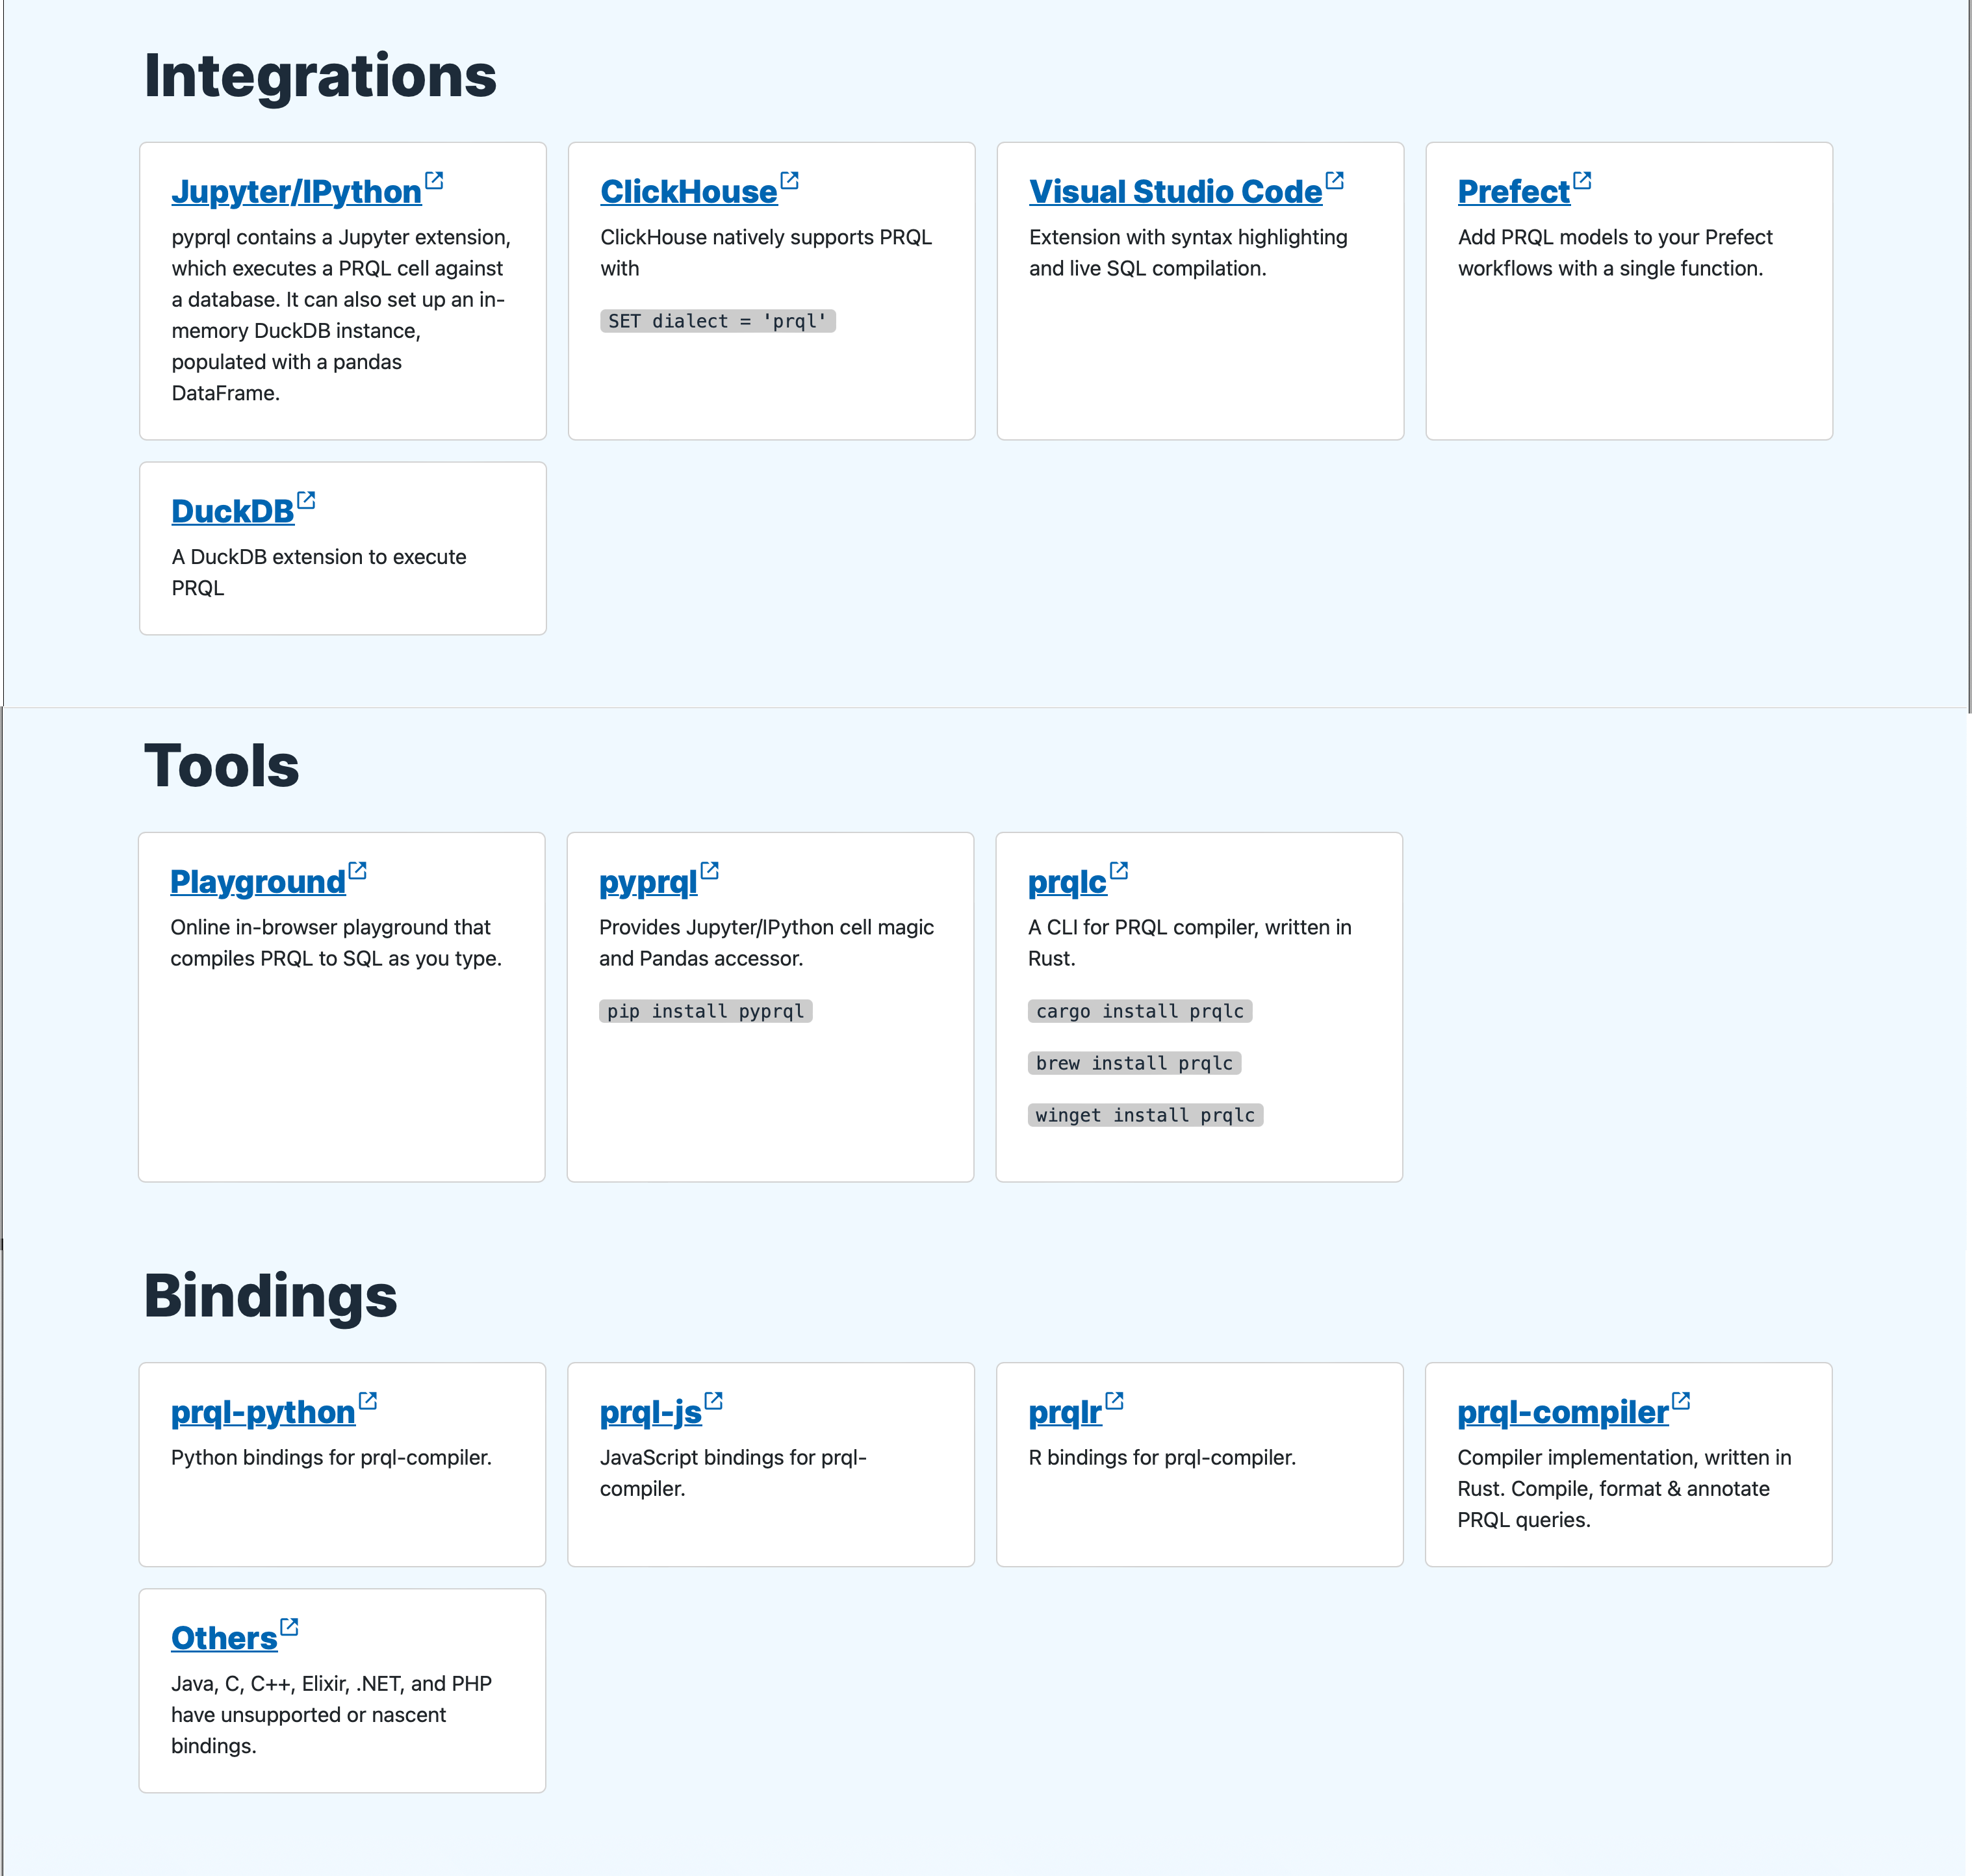 Just look at all of the integrations, tools, and integrations...